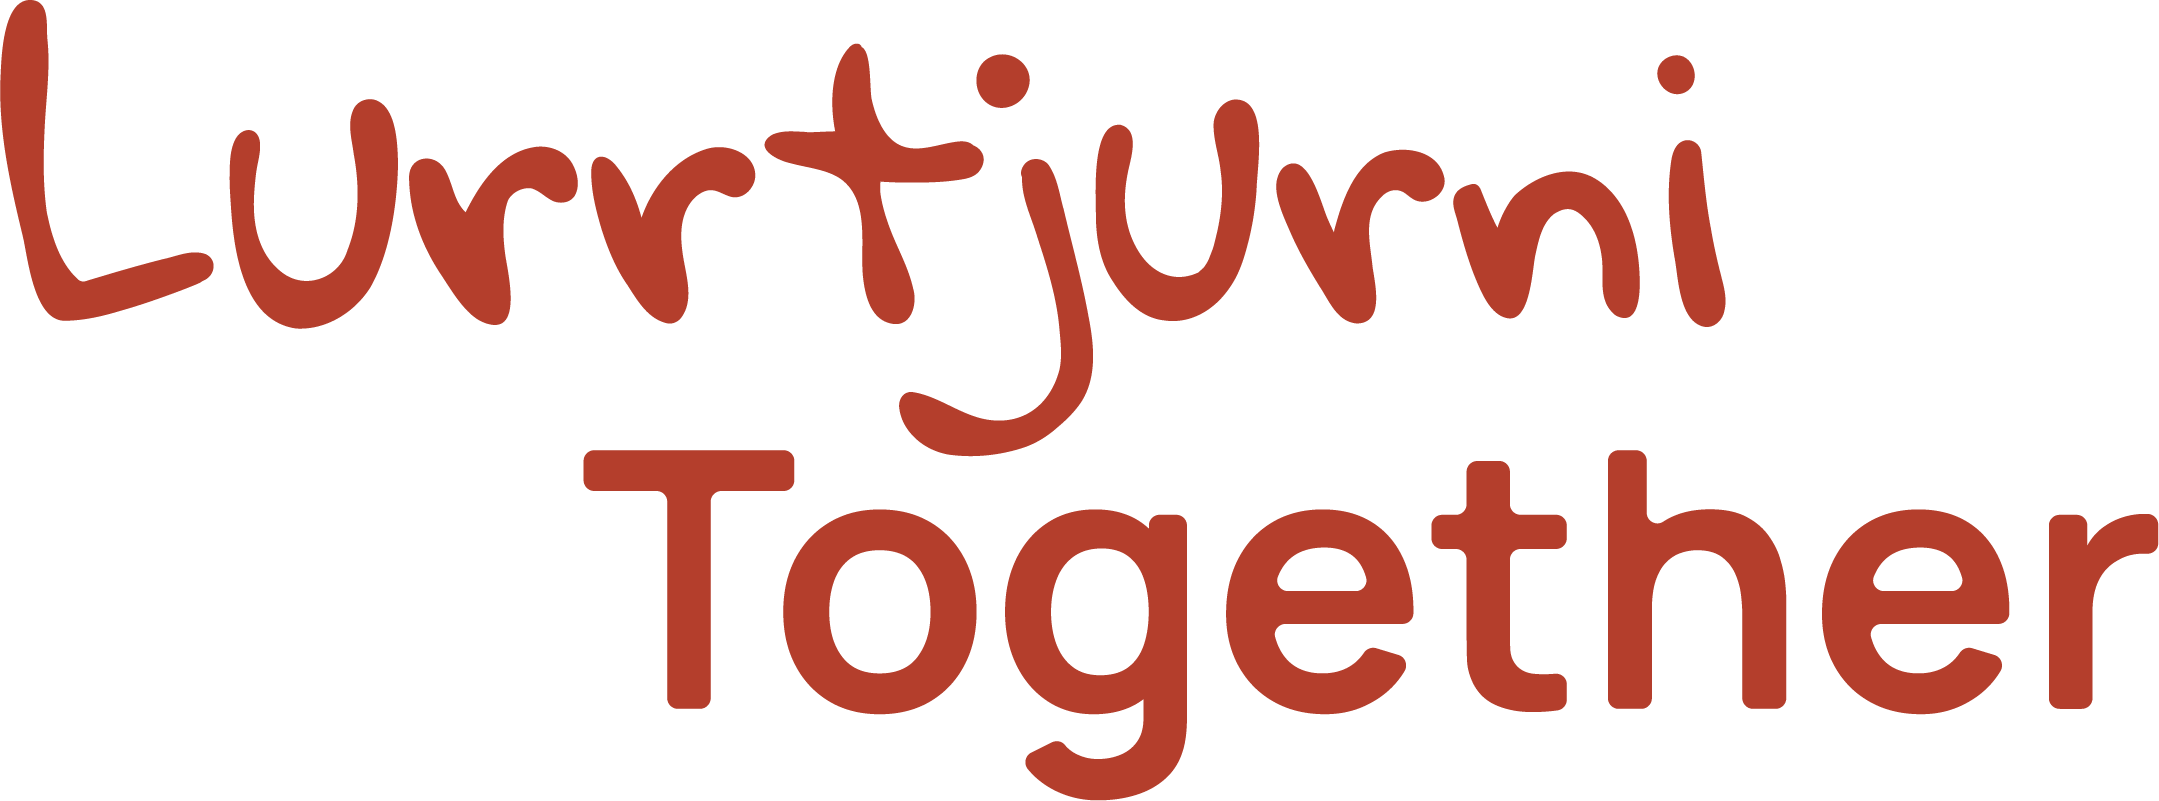 The words Lurrtjurni Together written in red writing on top of a series of small dots in the shape of an emu